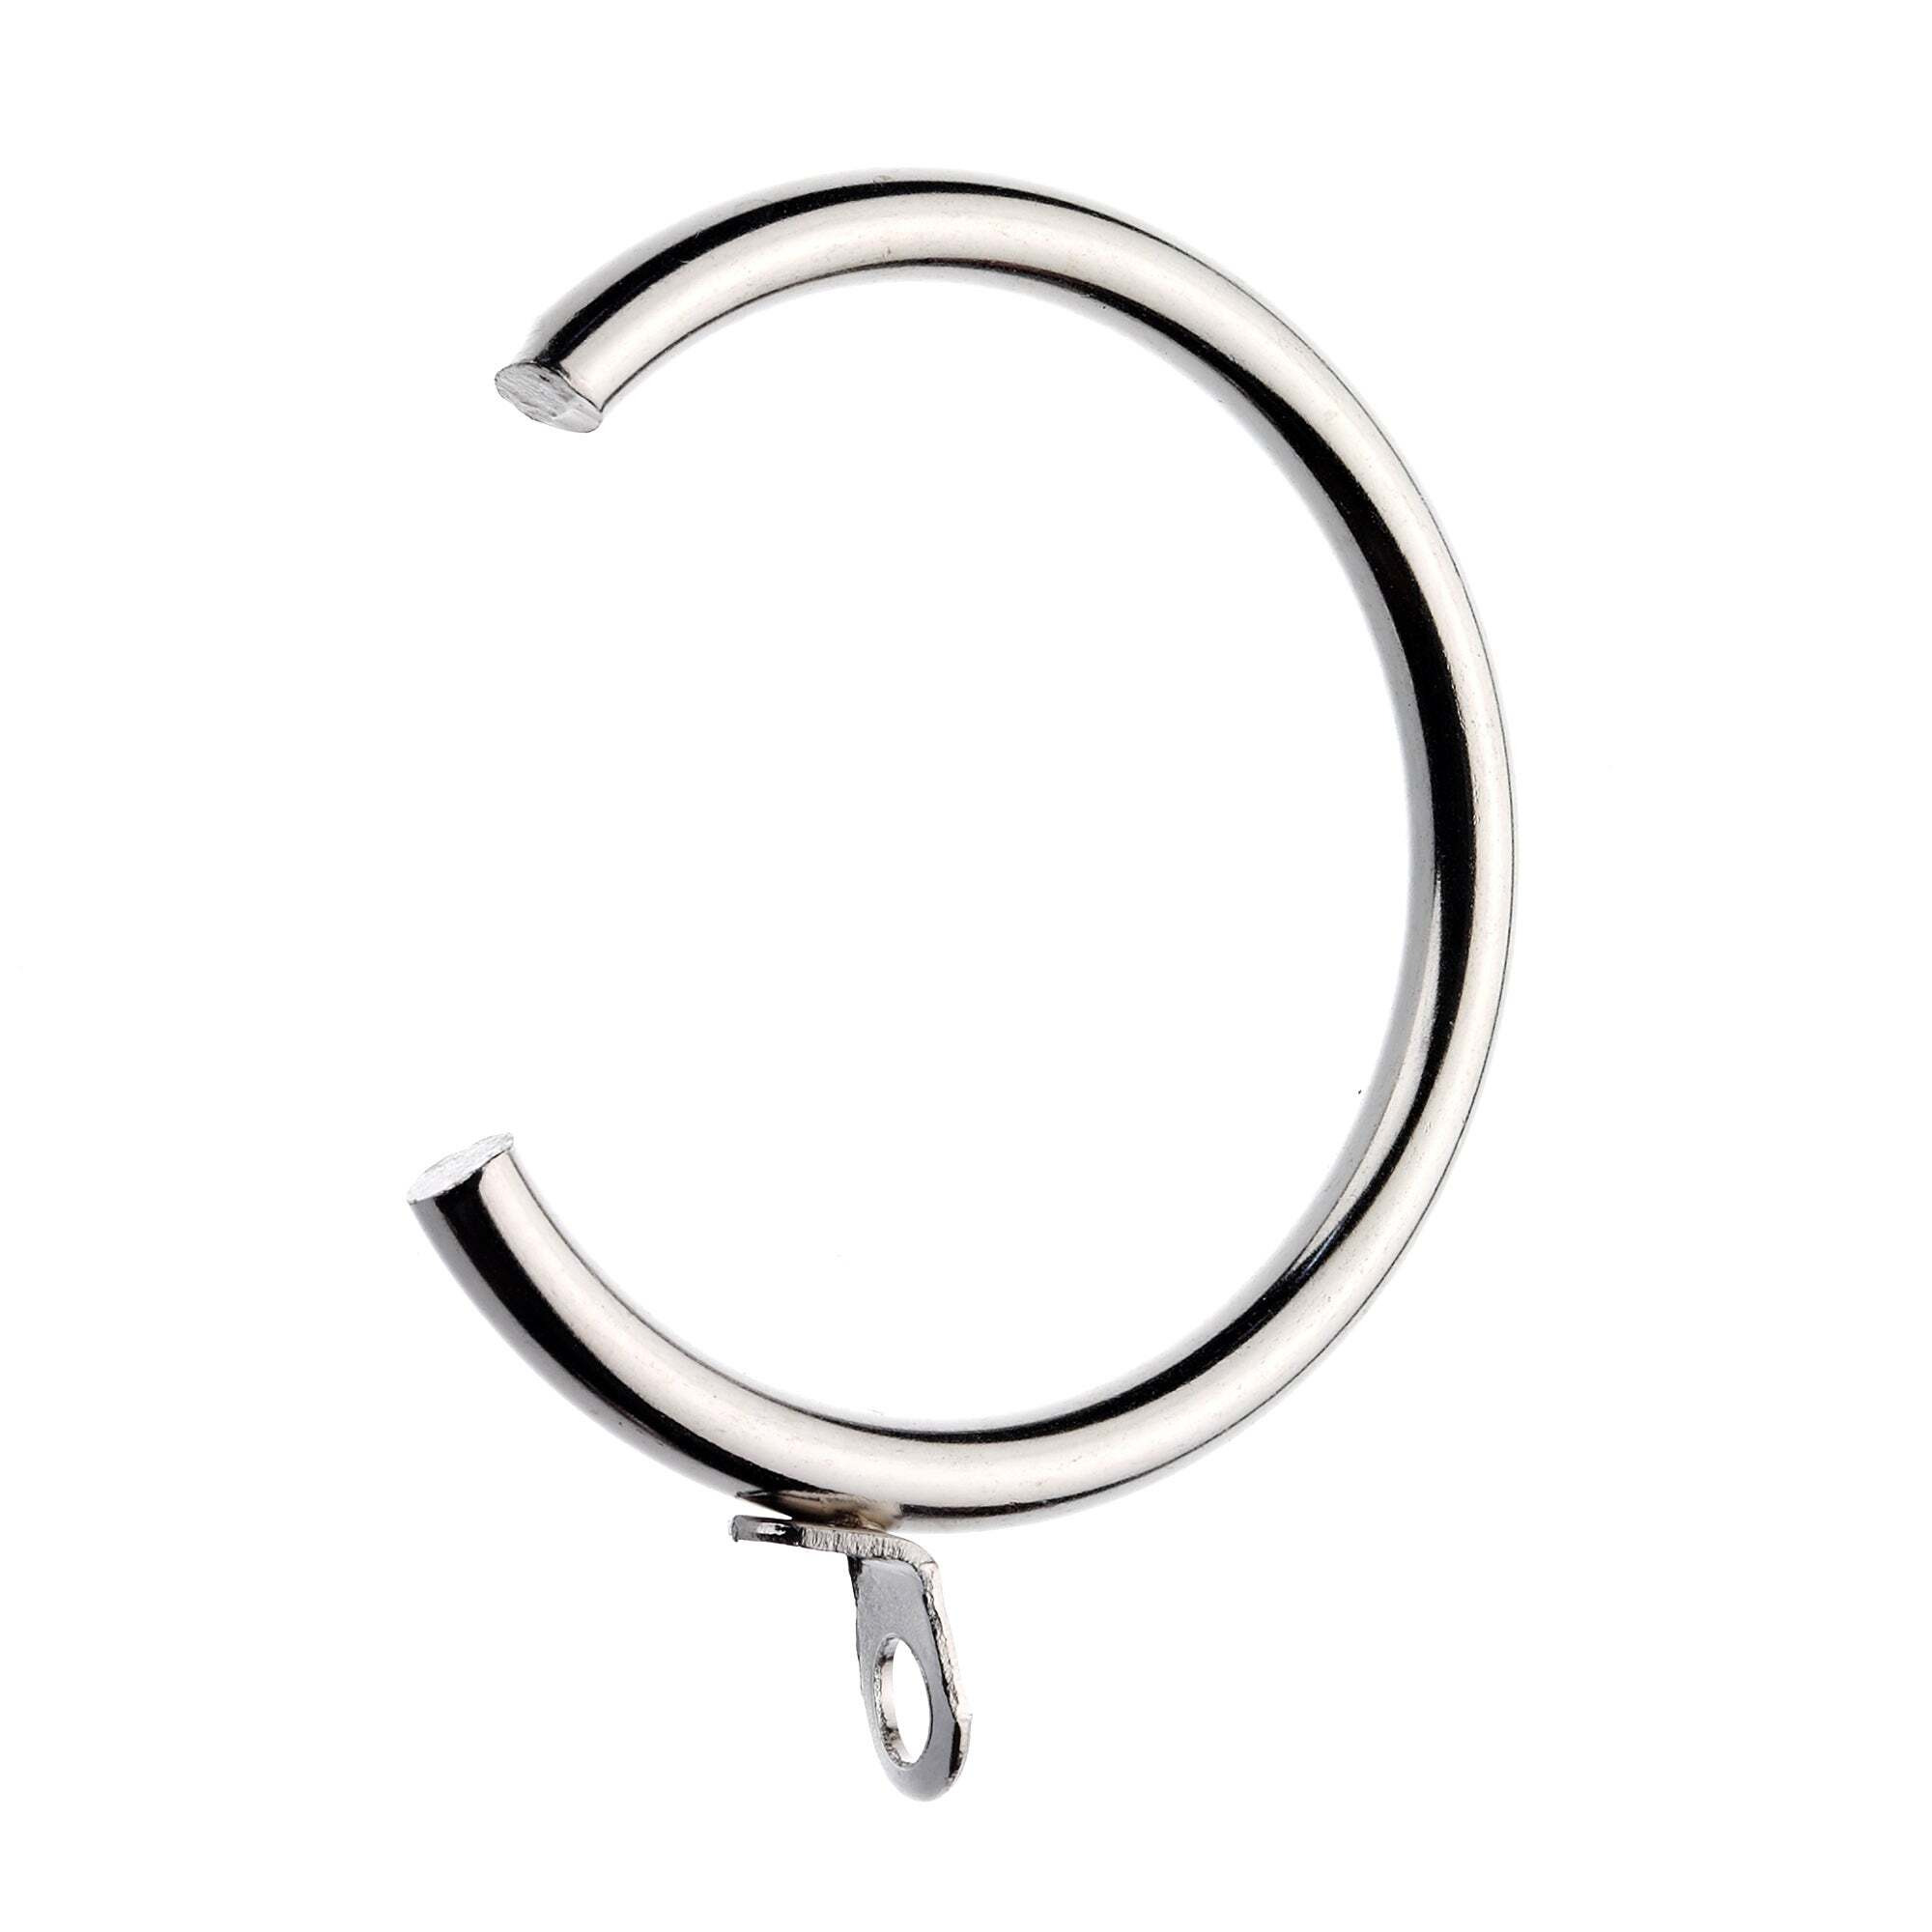 Pack of 6 28mm Bay Pole Passover Curtain Rings Silver